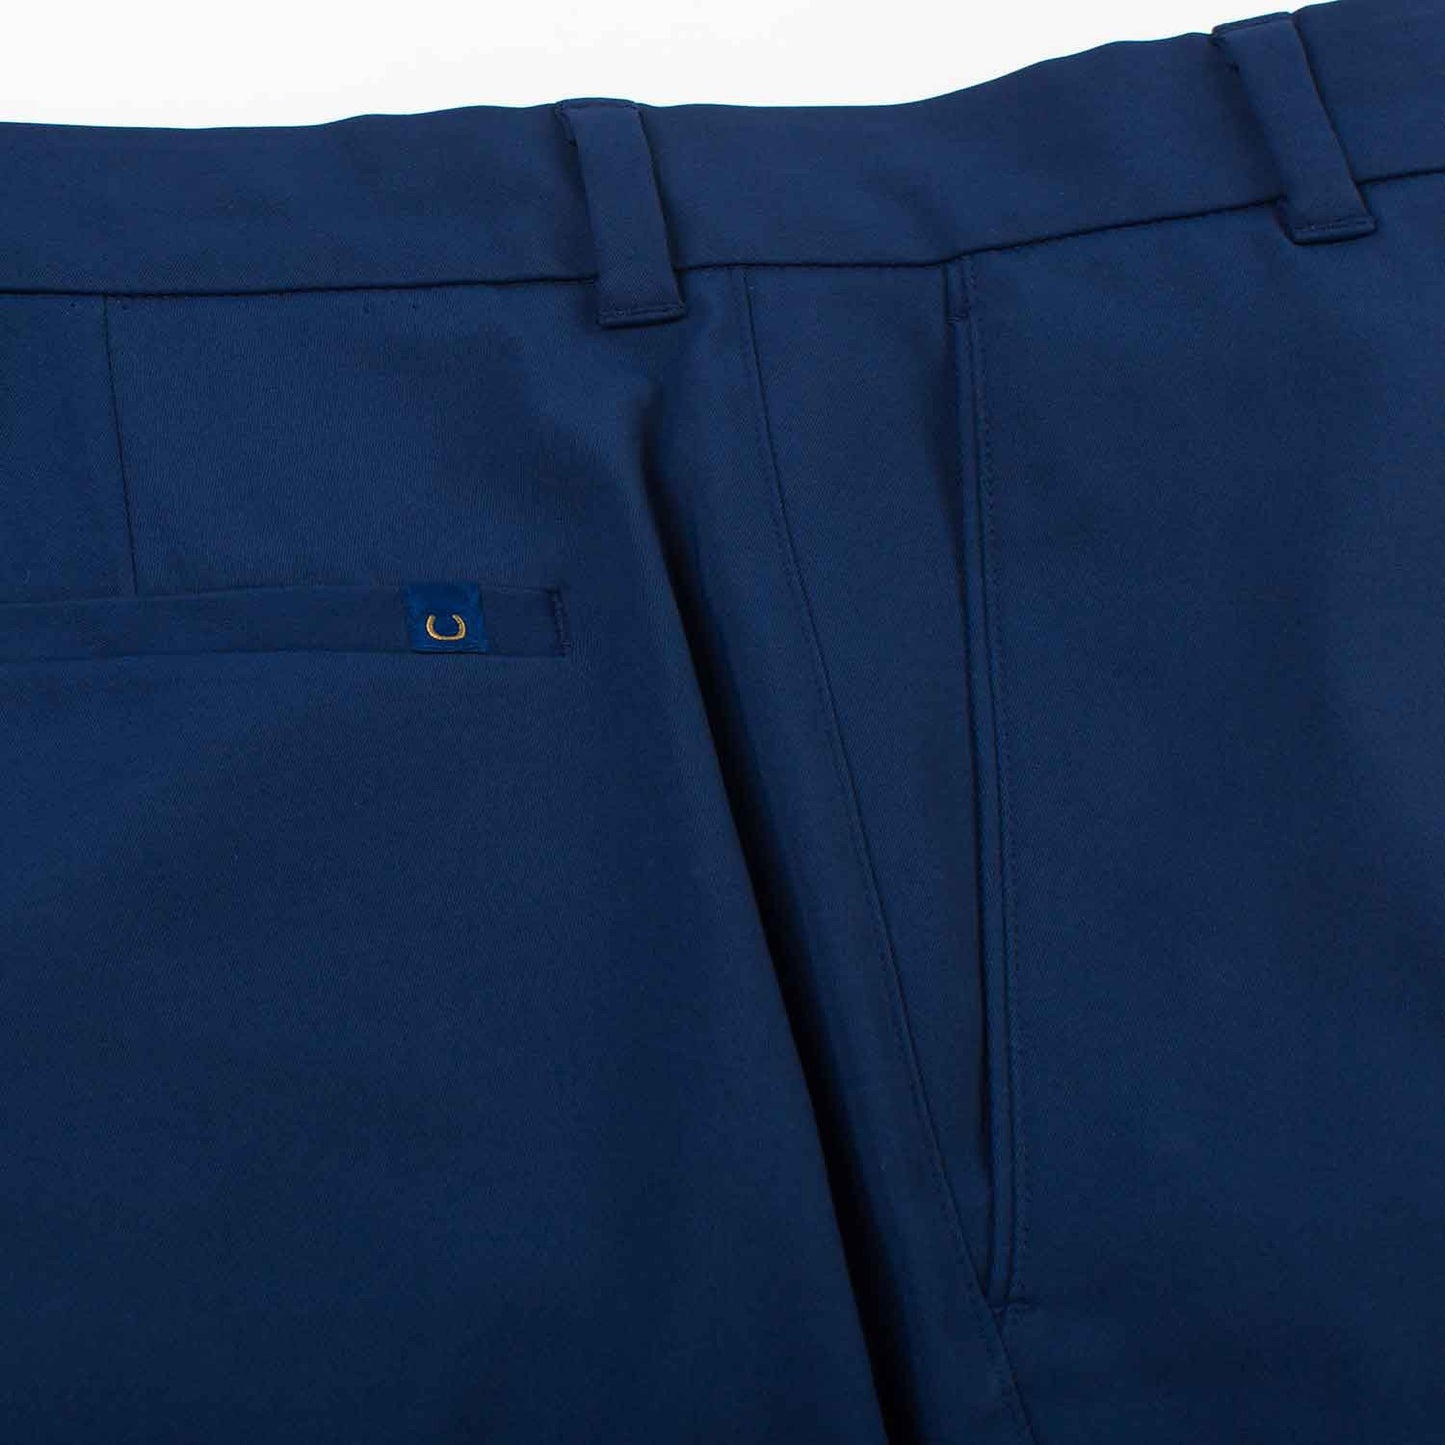 Oxford Men’s Perfromance golf shorts in Medieval blue navy 6whiskey six whisky